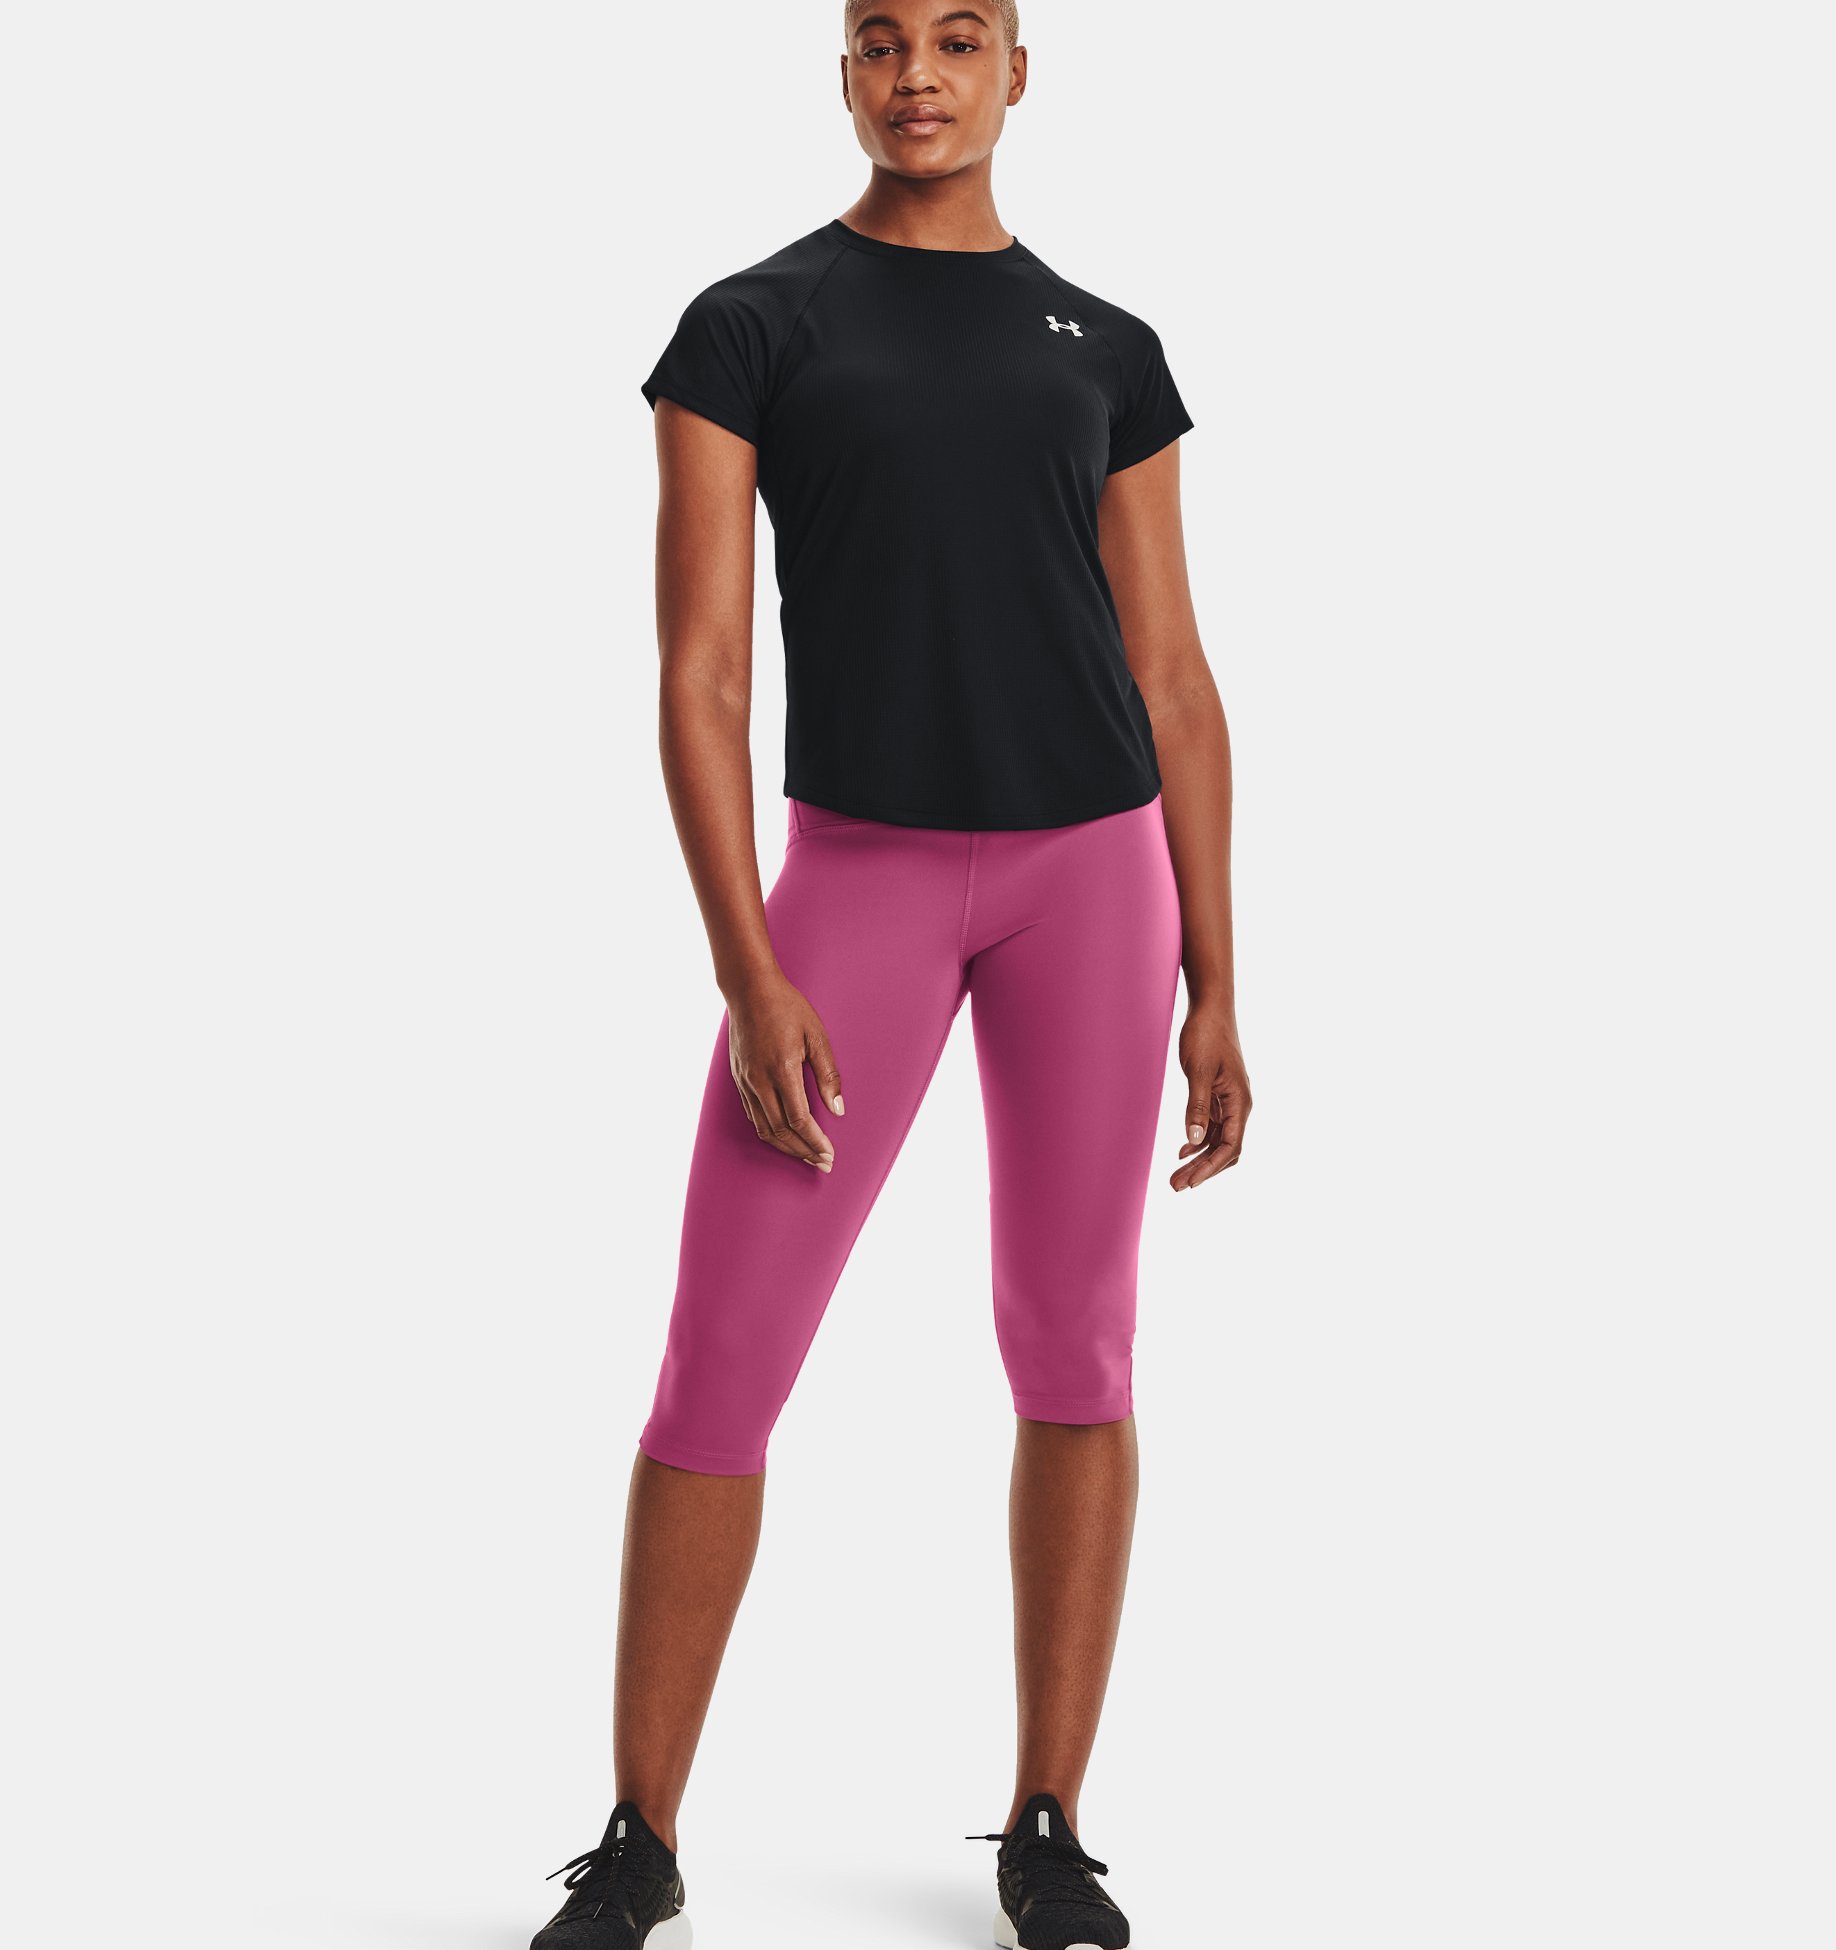 Under Armour UA SPEED STRIDE Comfortable Running Apparel for Women Women Ultralight and Breathable Gym T Shirt 